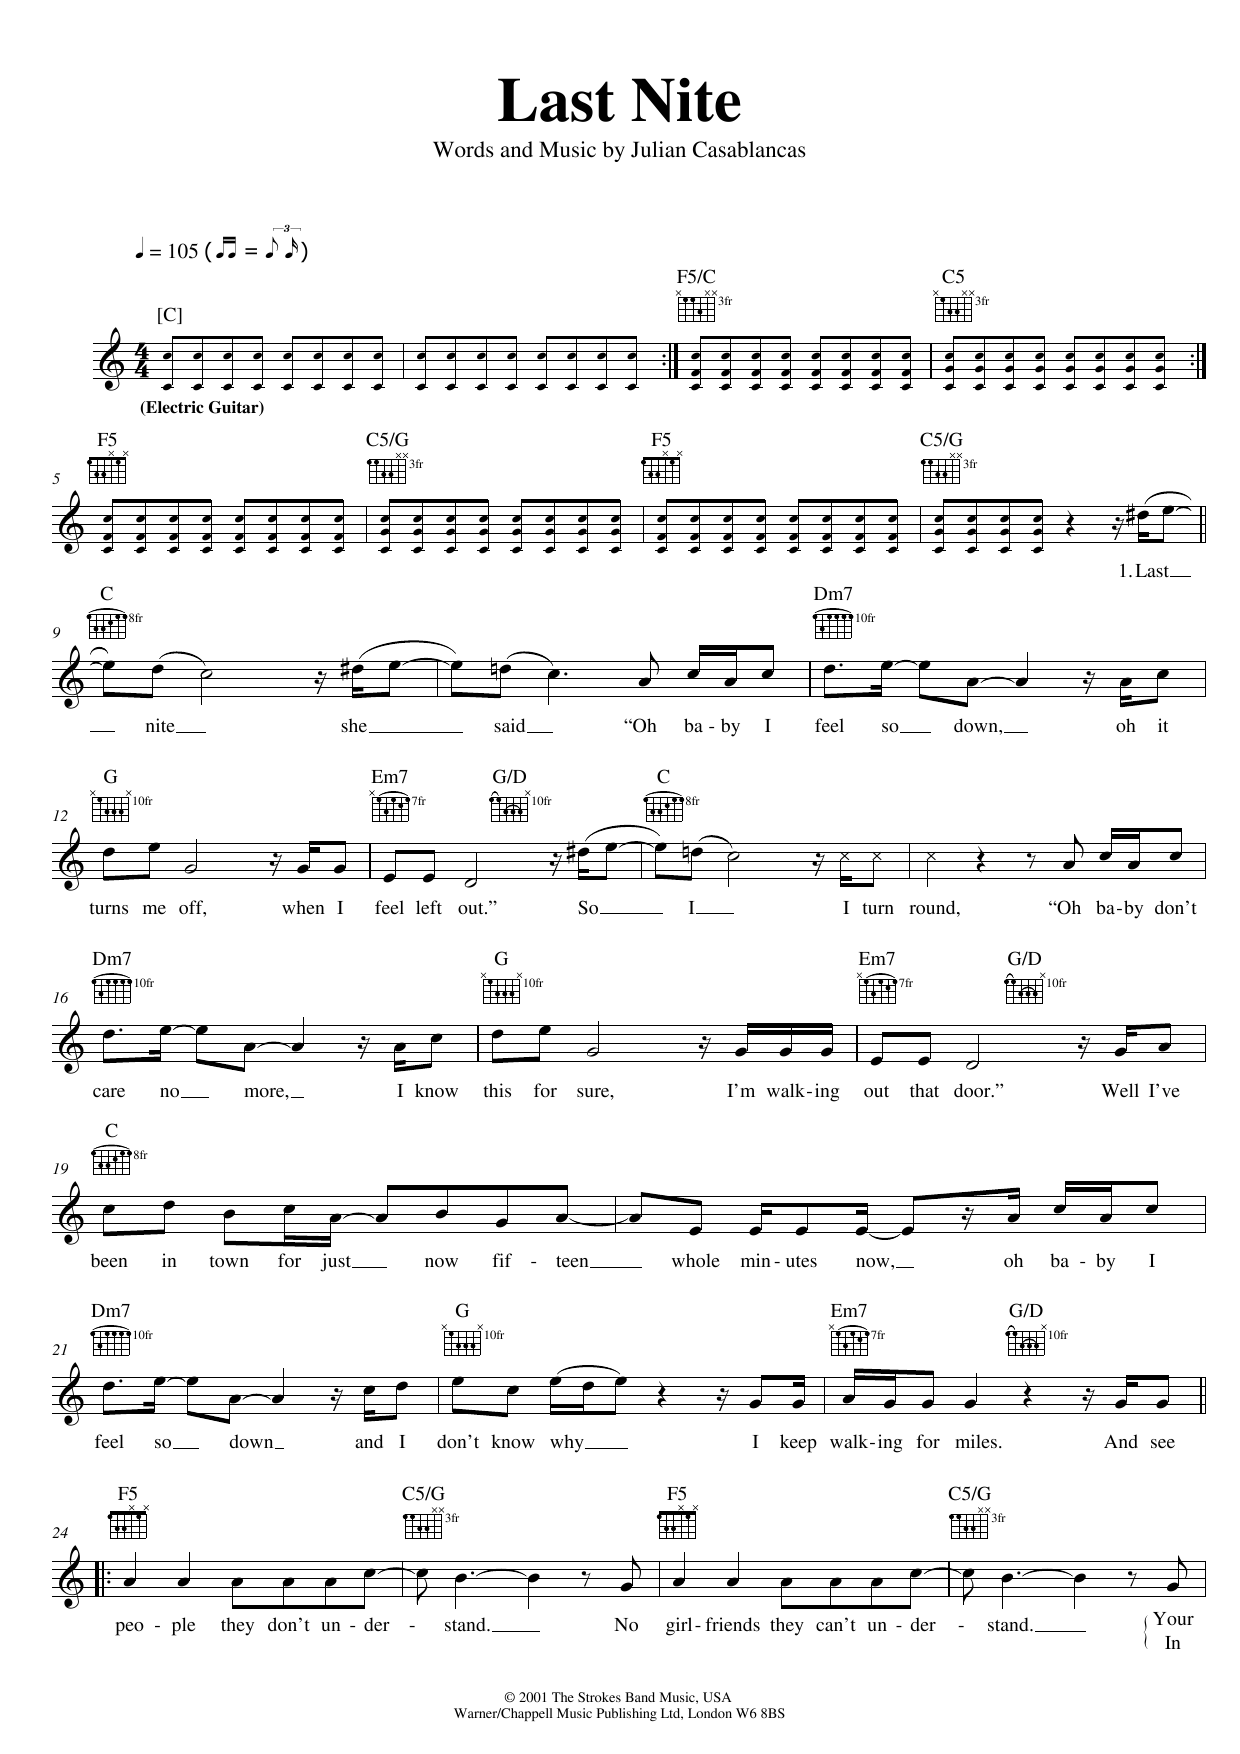 Download The Strokes Last Nite Sheet Music